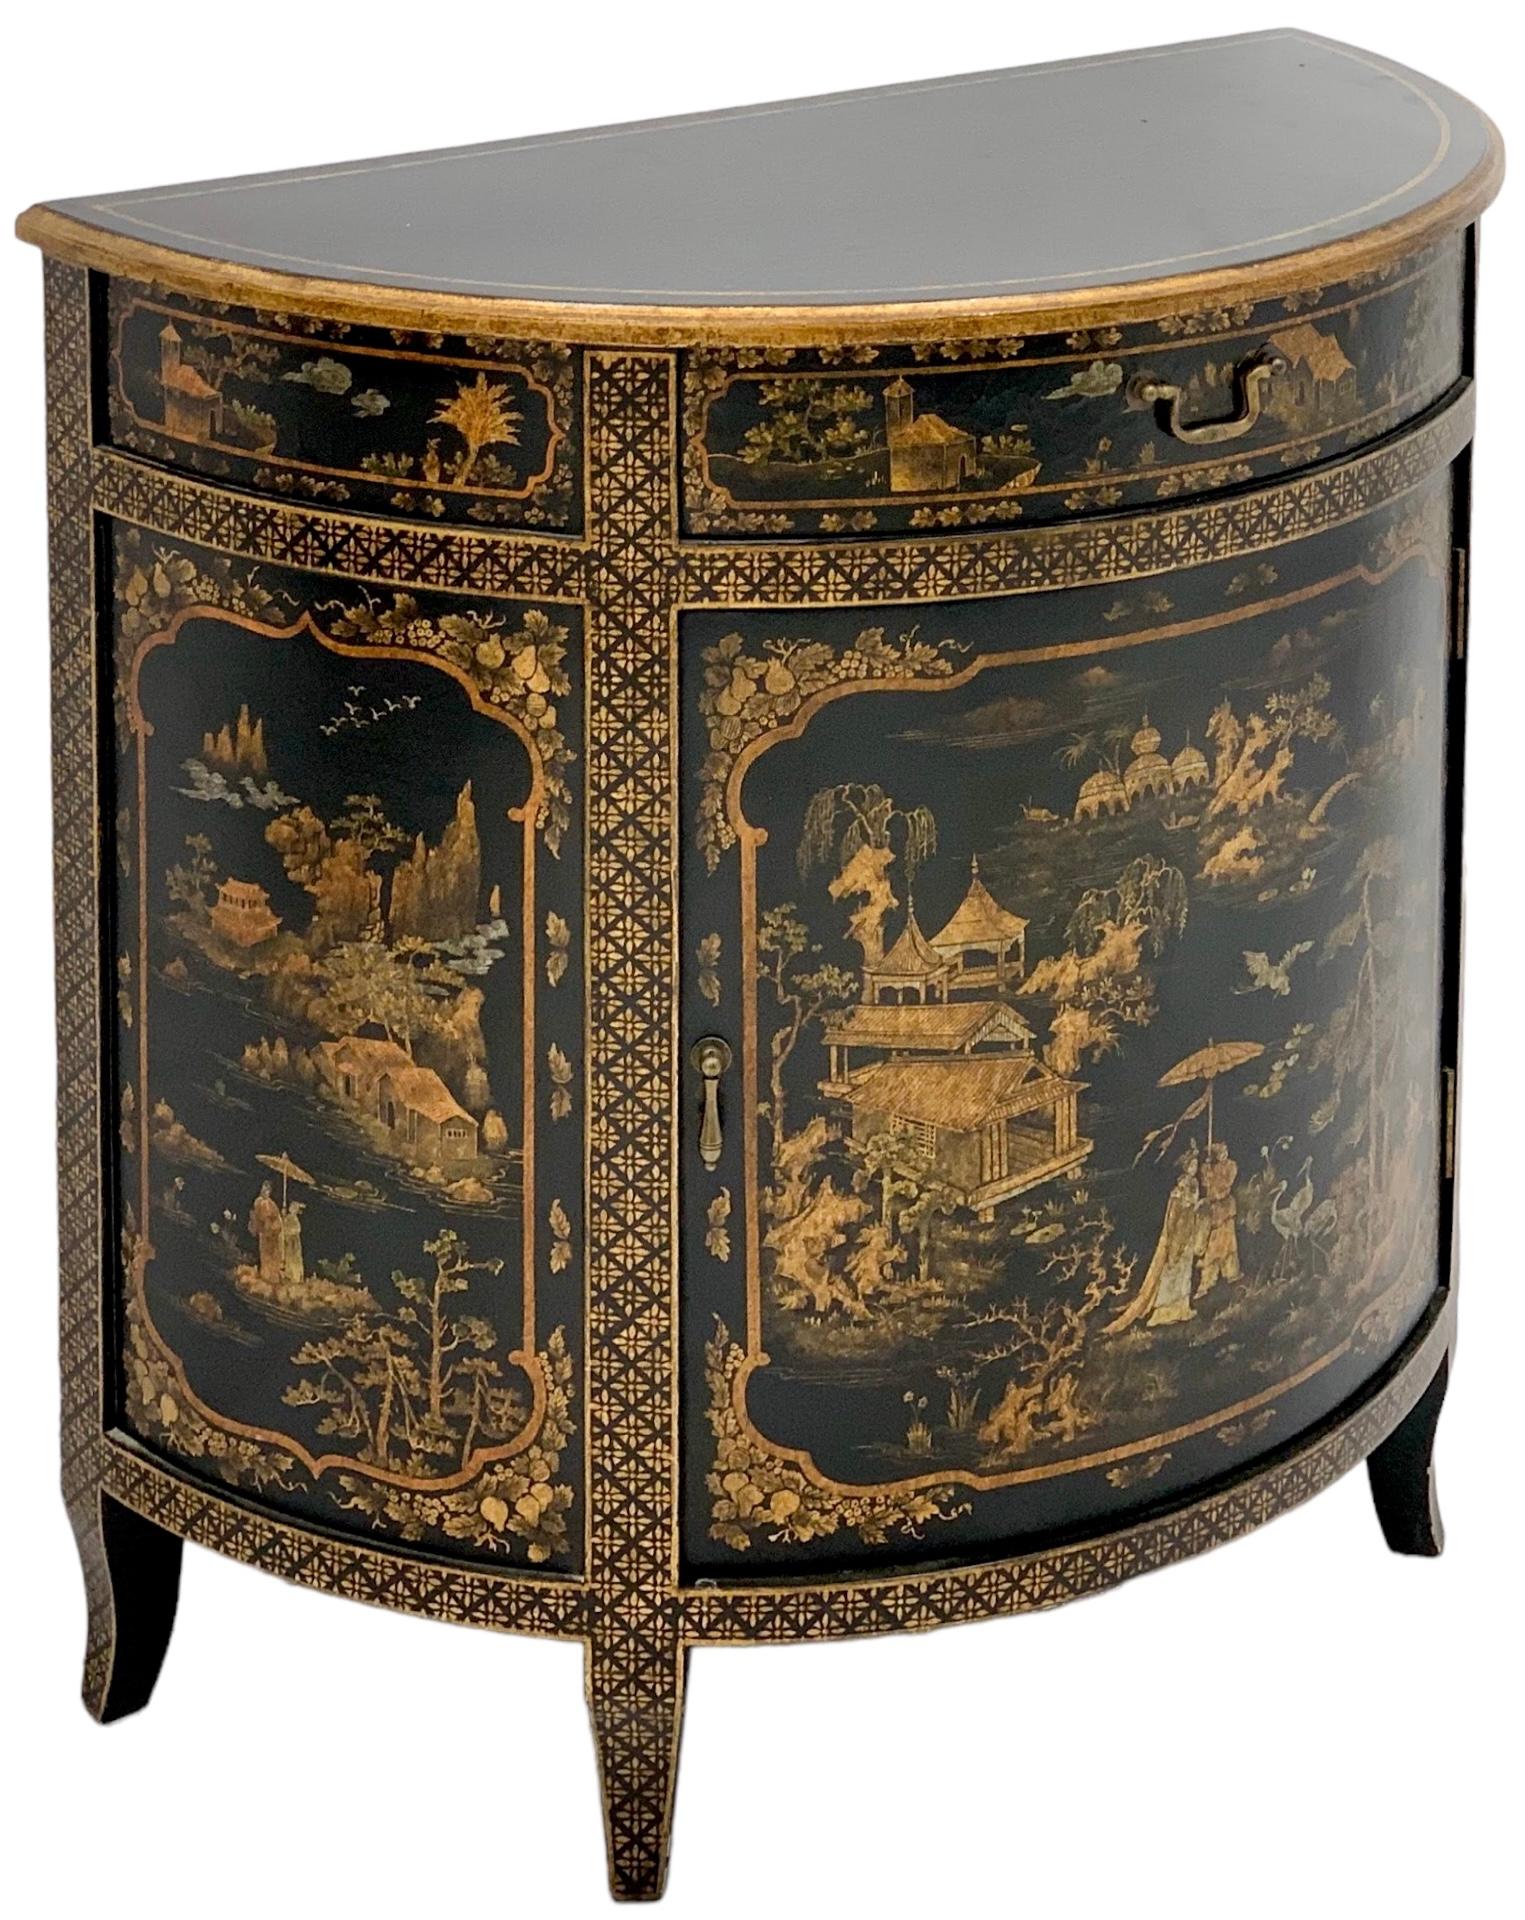 Wood Italian Chinoiserie Black Lacquer & Gilt Demilune Cabinet By Decorative Crafts